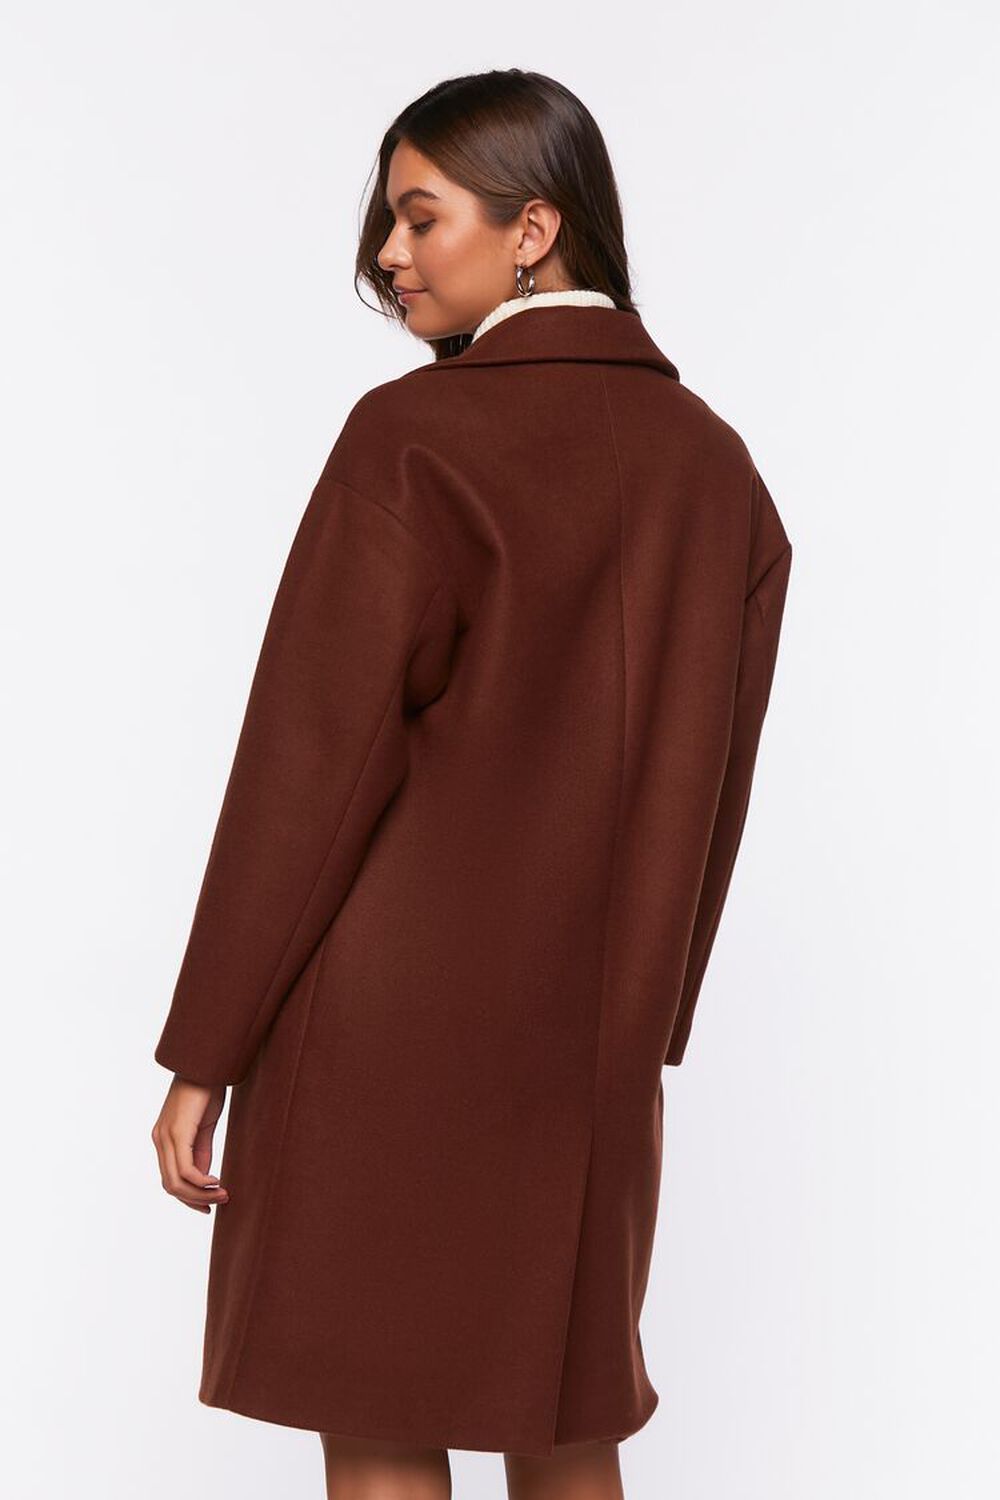 BROWN Double-Breasted Duster Coat, image 3